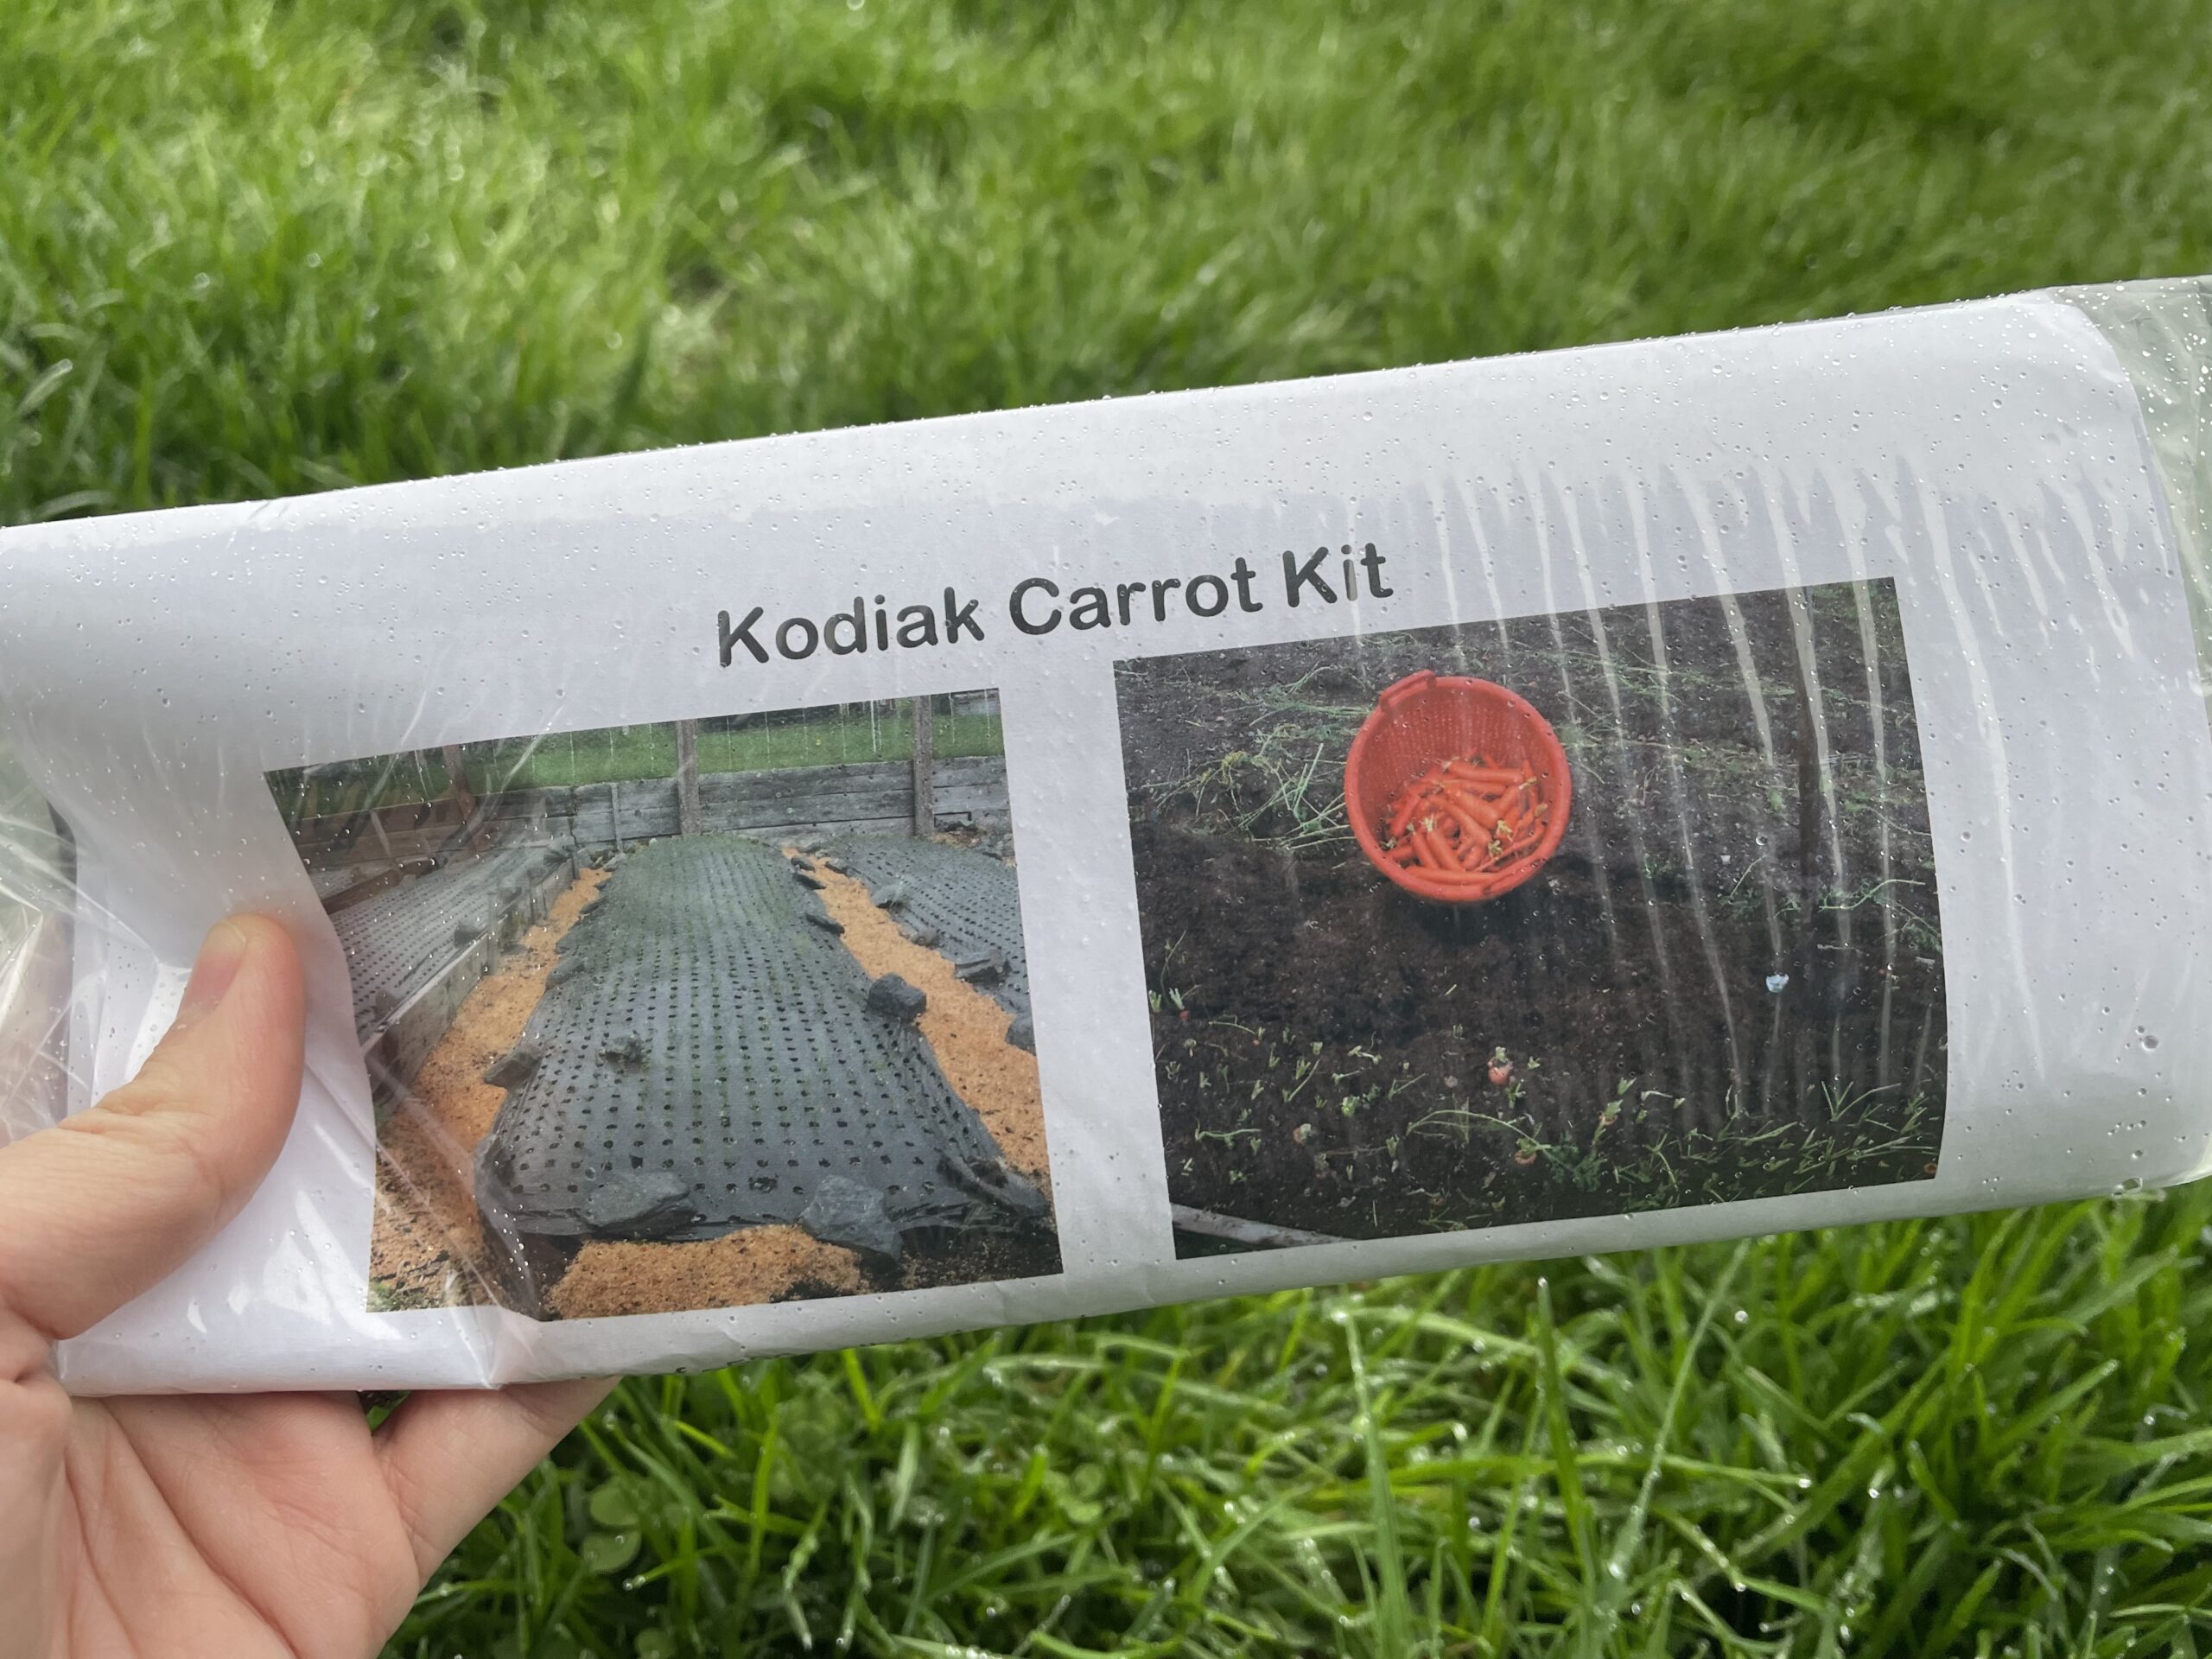 a packet, in a plastic bag, that says Kodiak Carrot Kit